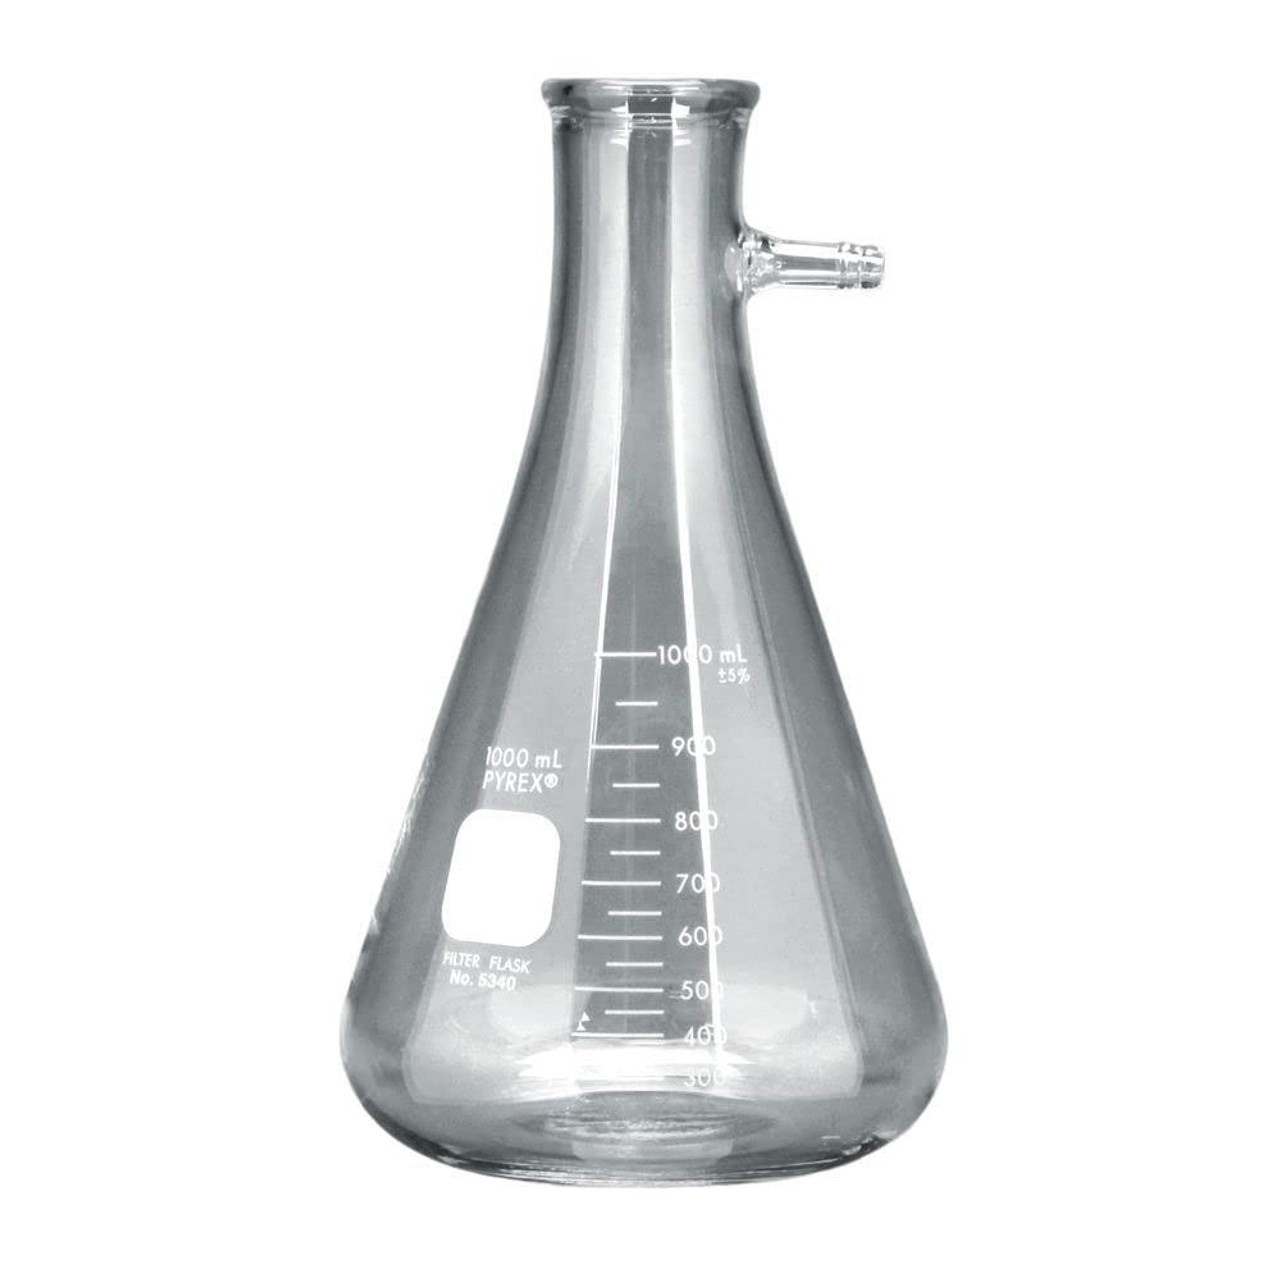 4,000 mL Pyrex Glass Filtering Flask, Heavy-Walled, Side Tubulation